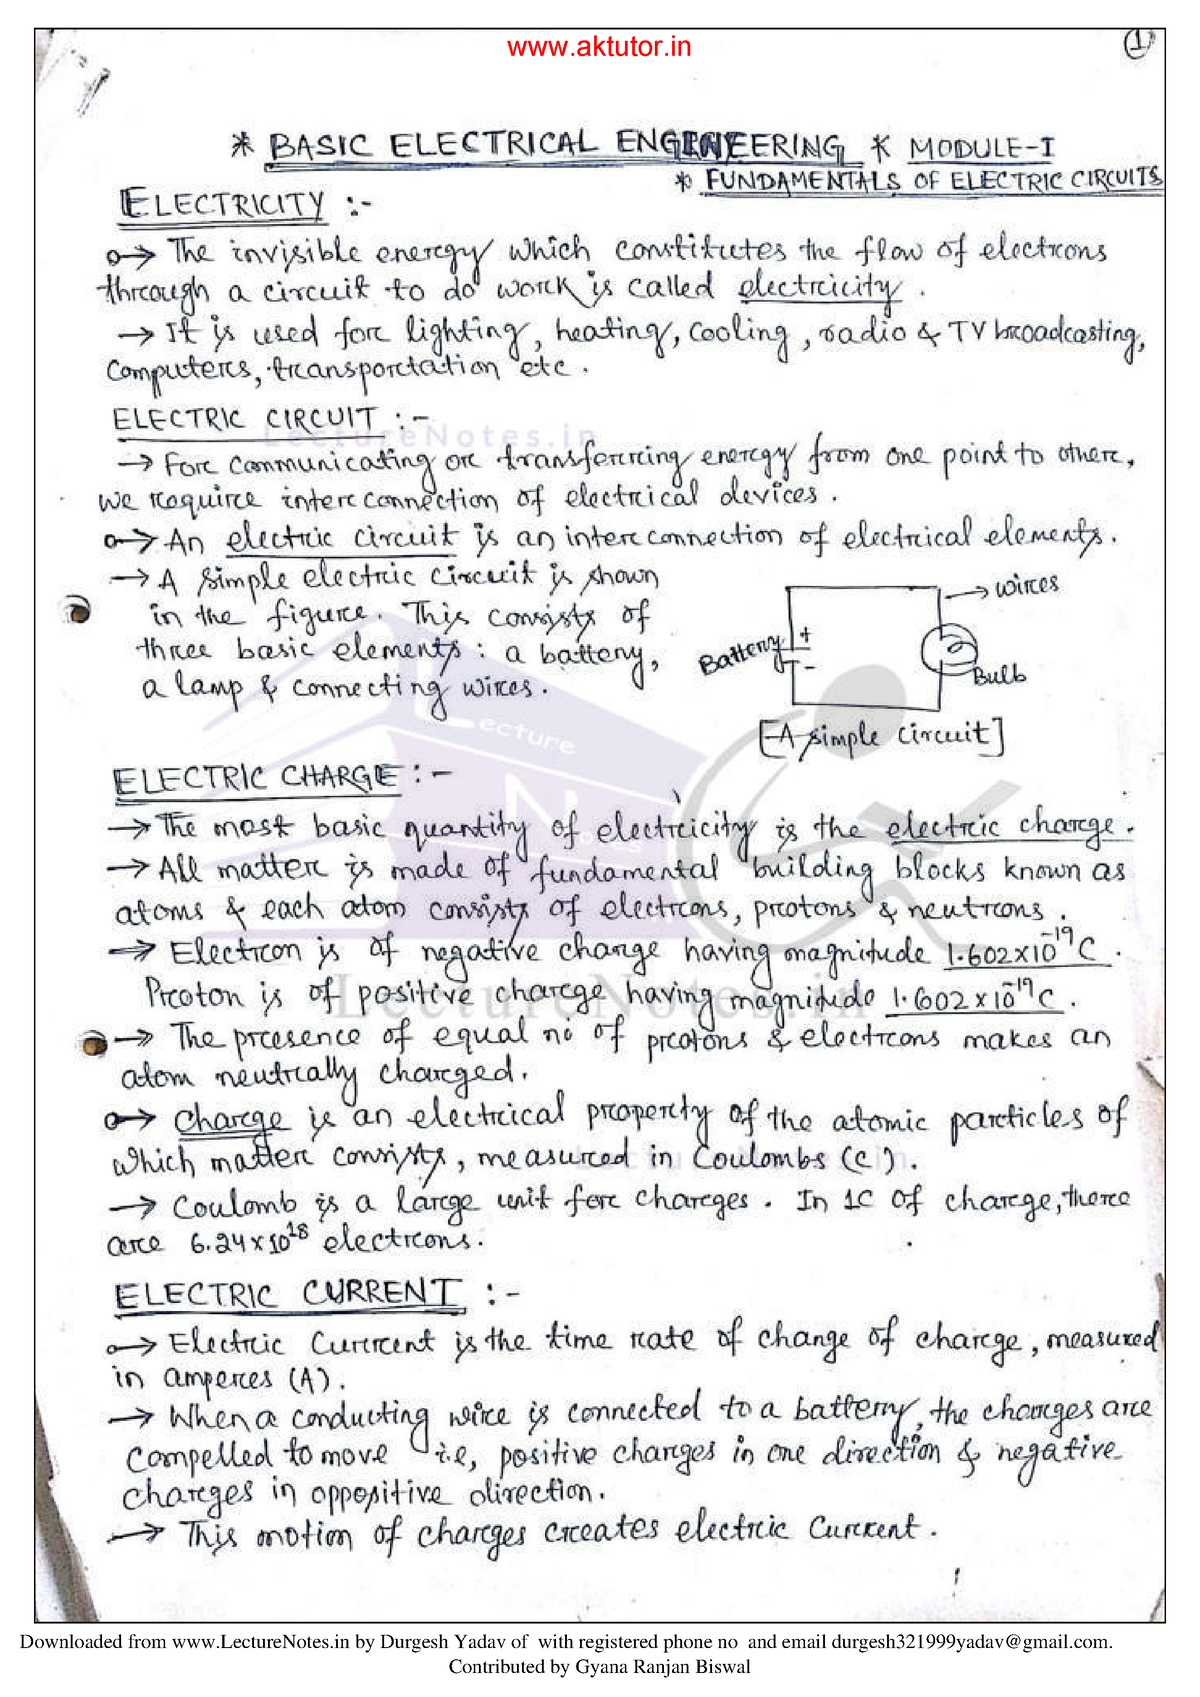 essay about electrical engineering